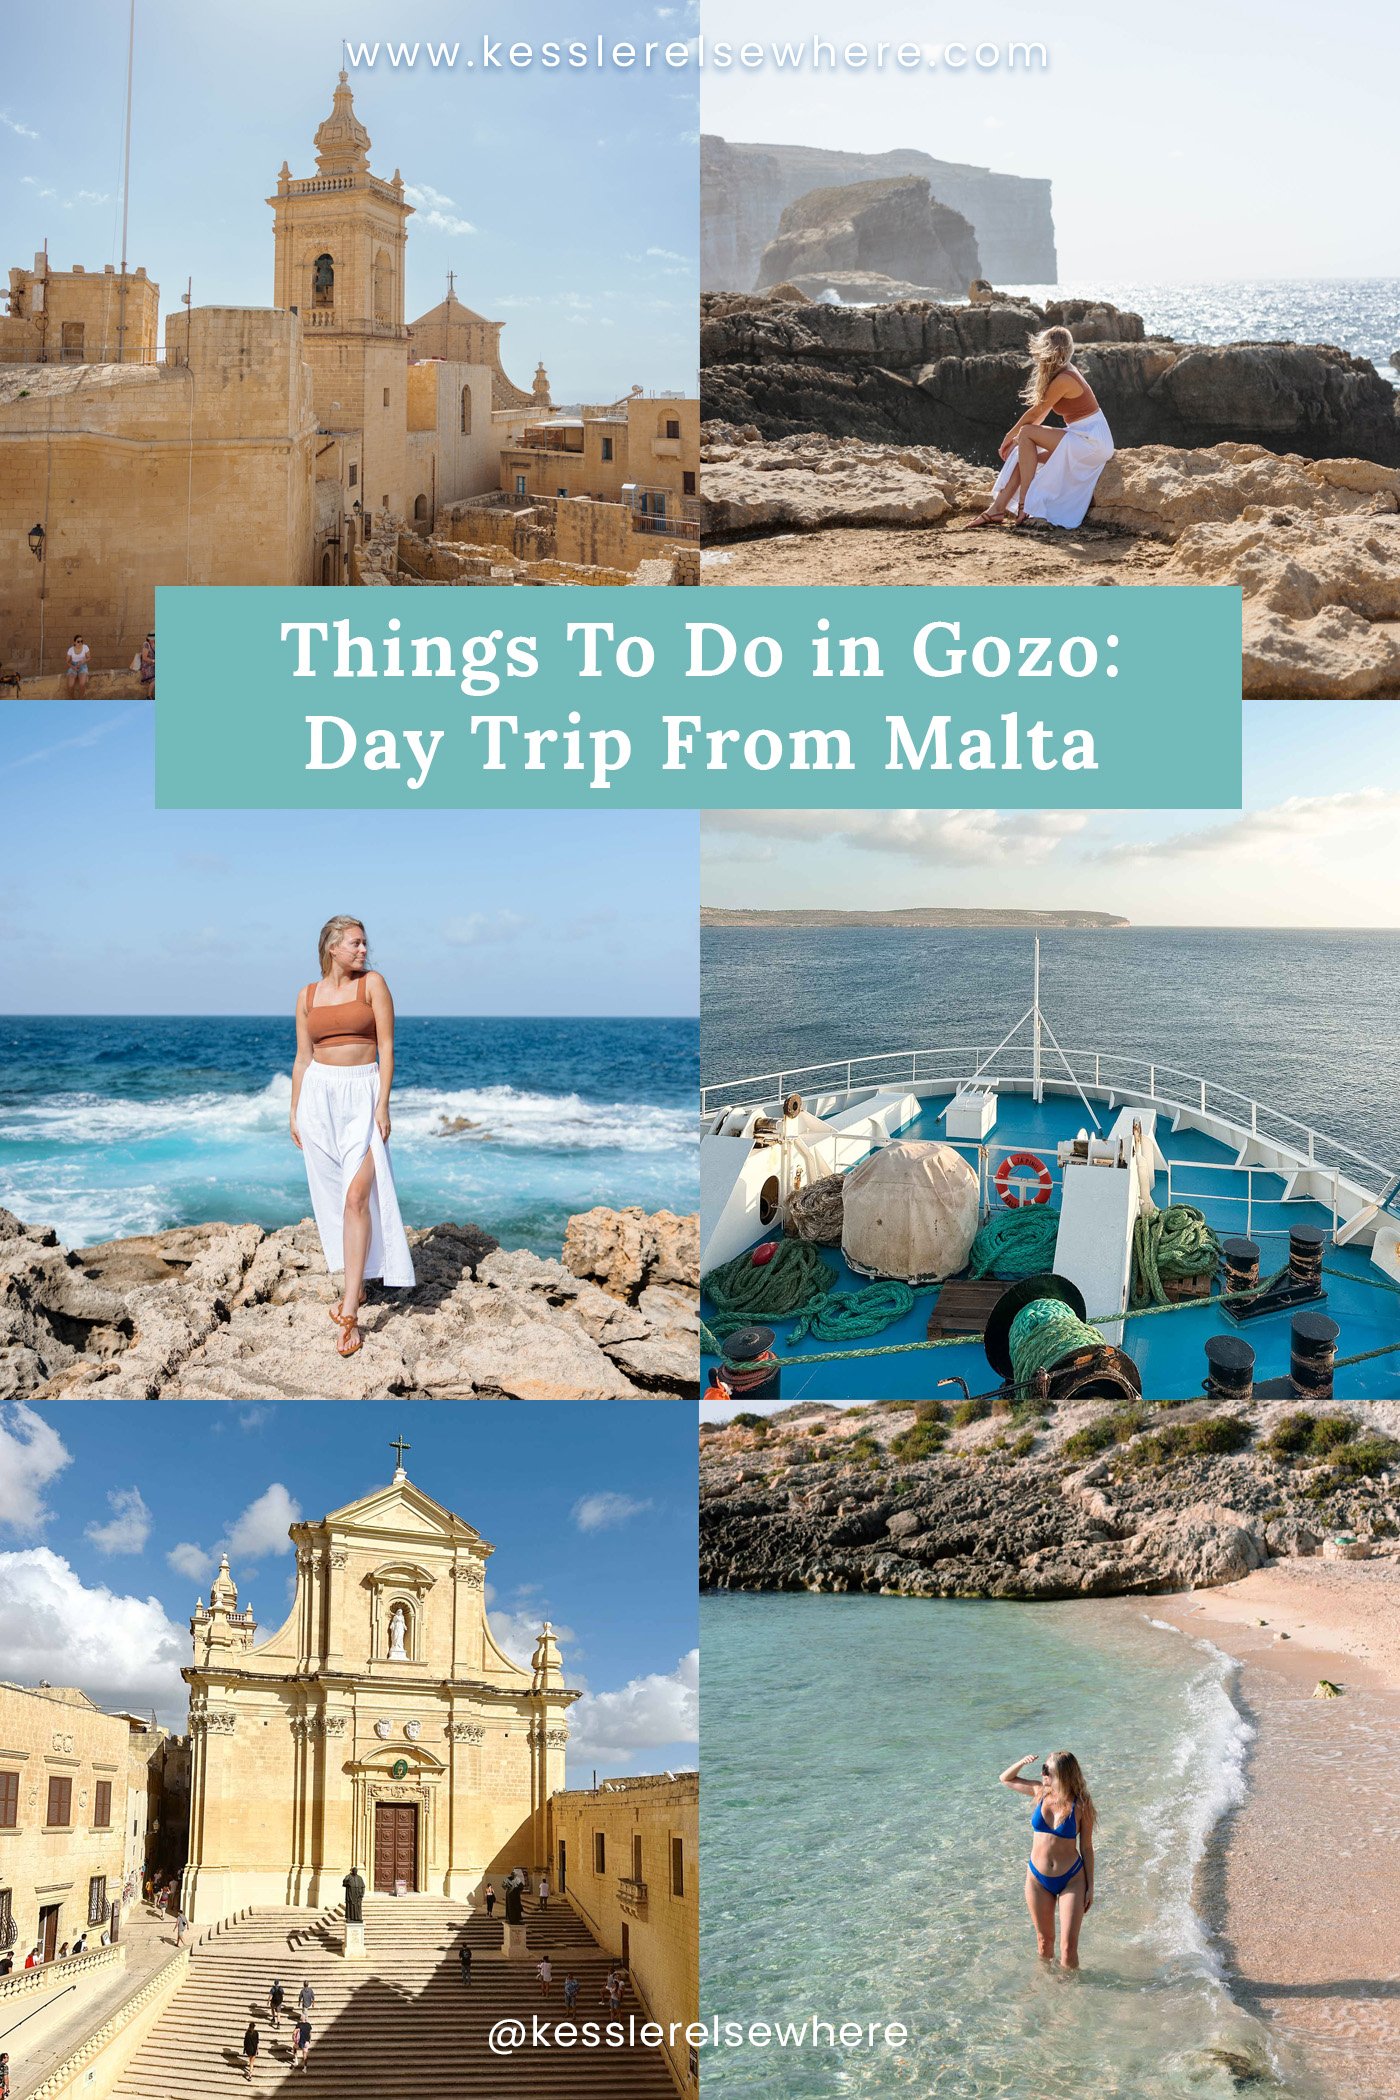 Things To Do in Gozo: Day Trip From Malta